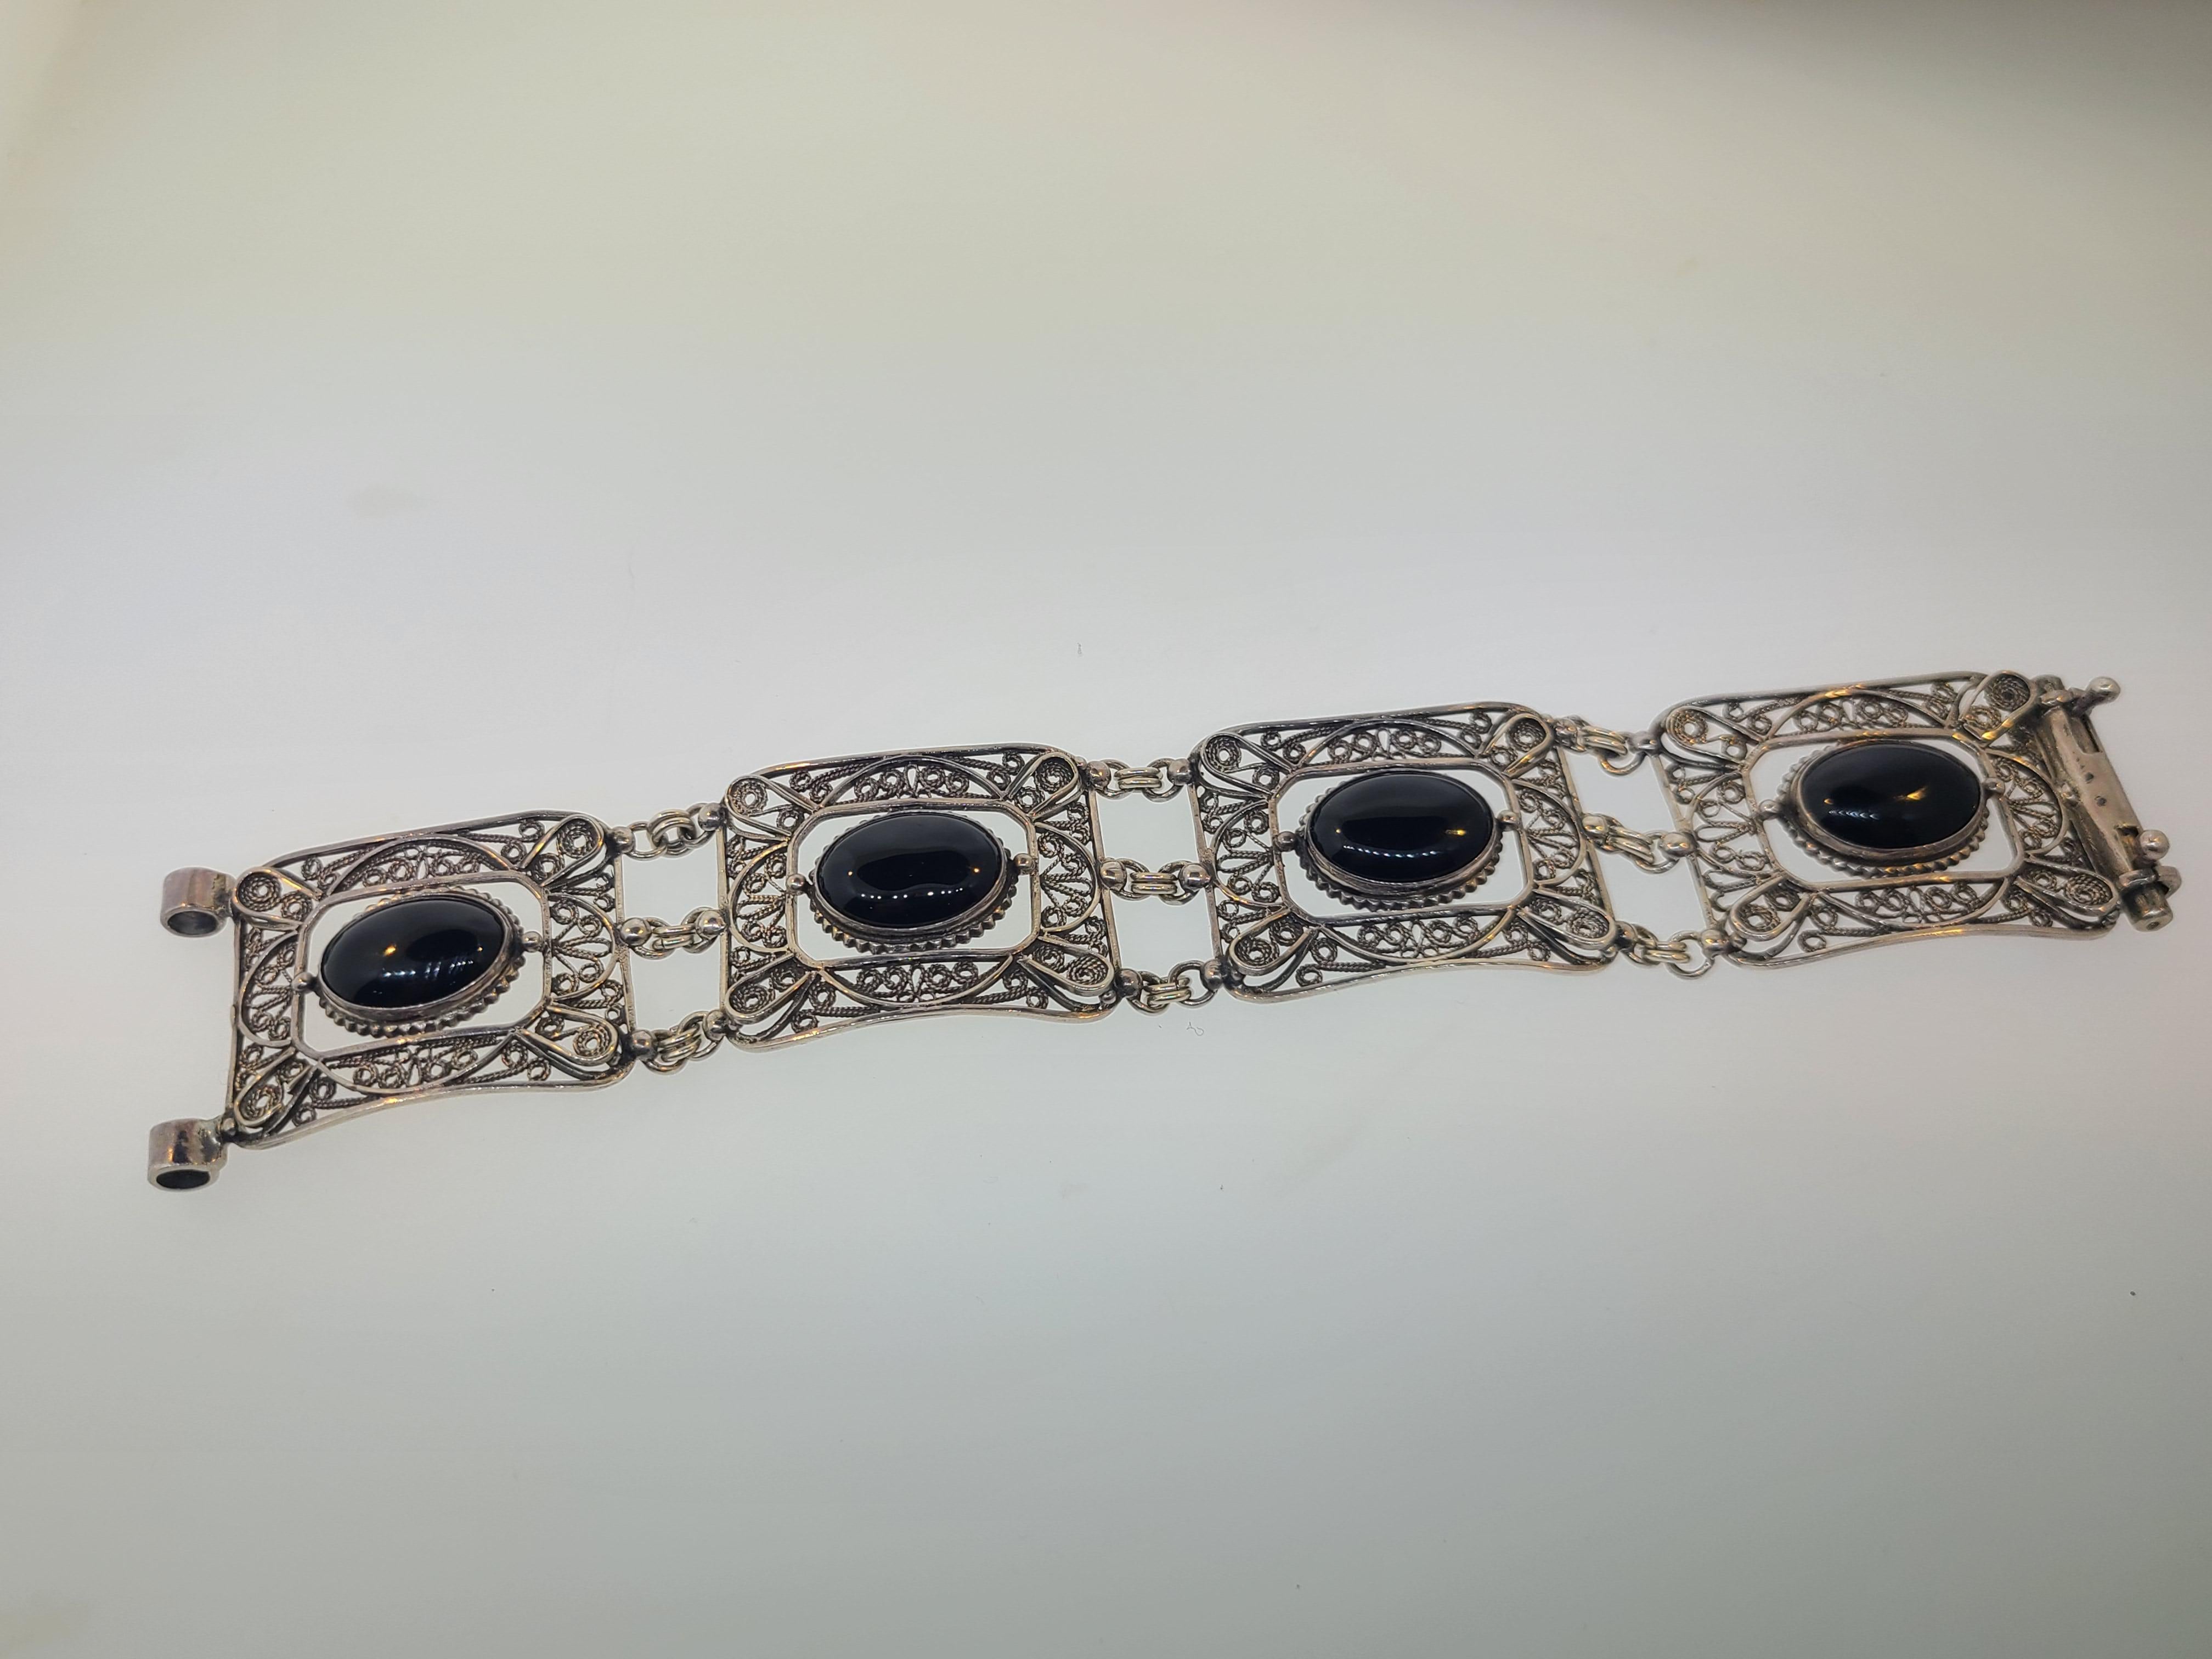 This estate found retro 1960's/70's linked panel bracelet is made of sterling silver with oval cut cabochon stones. The bracelet measures 7 3/4